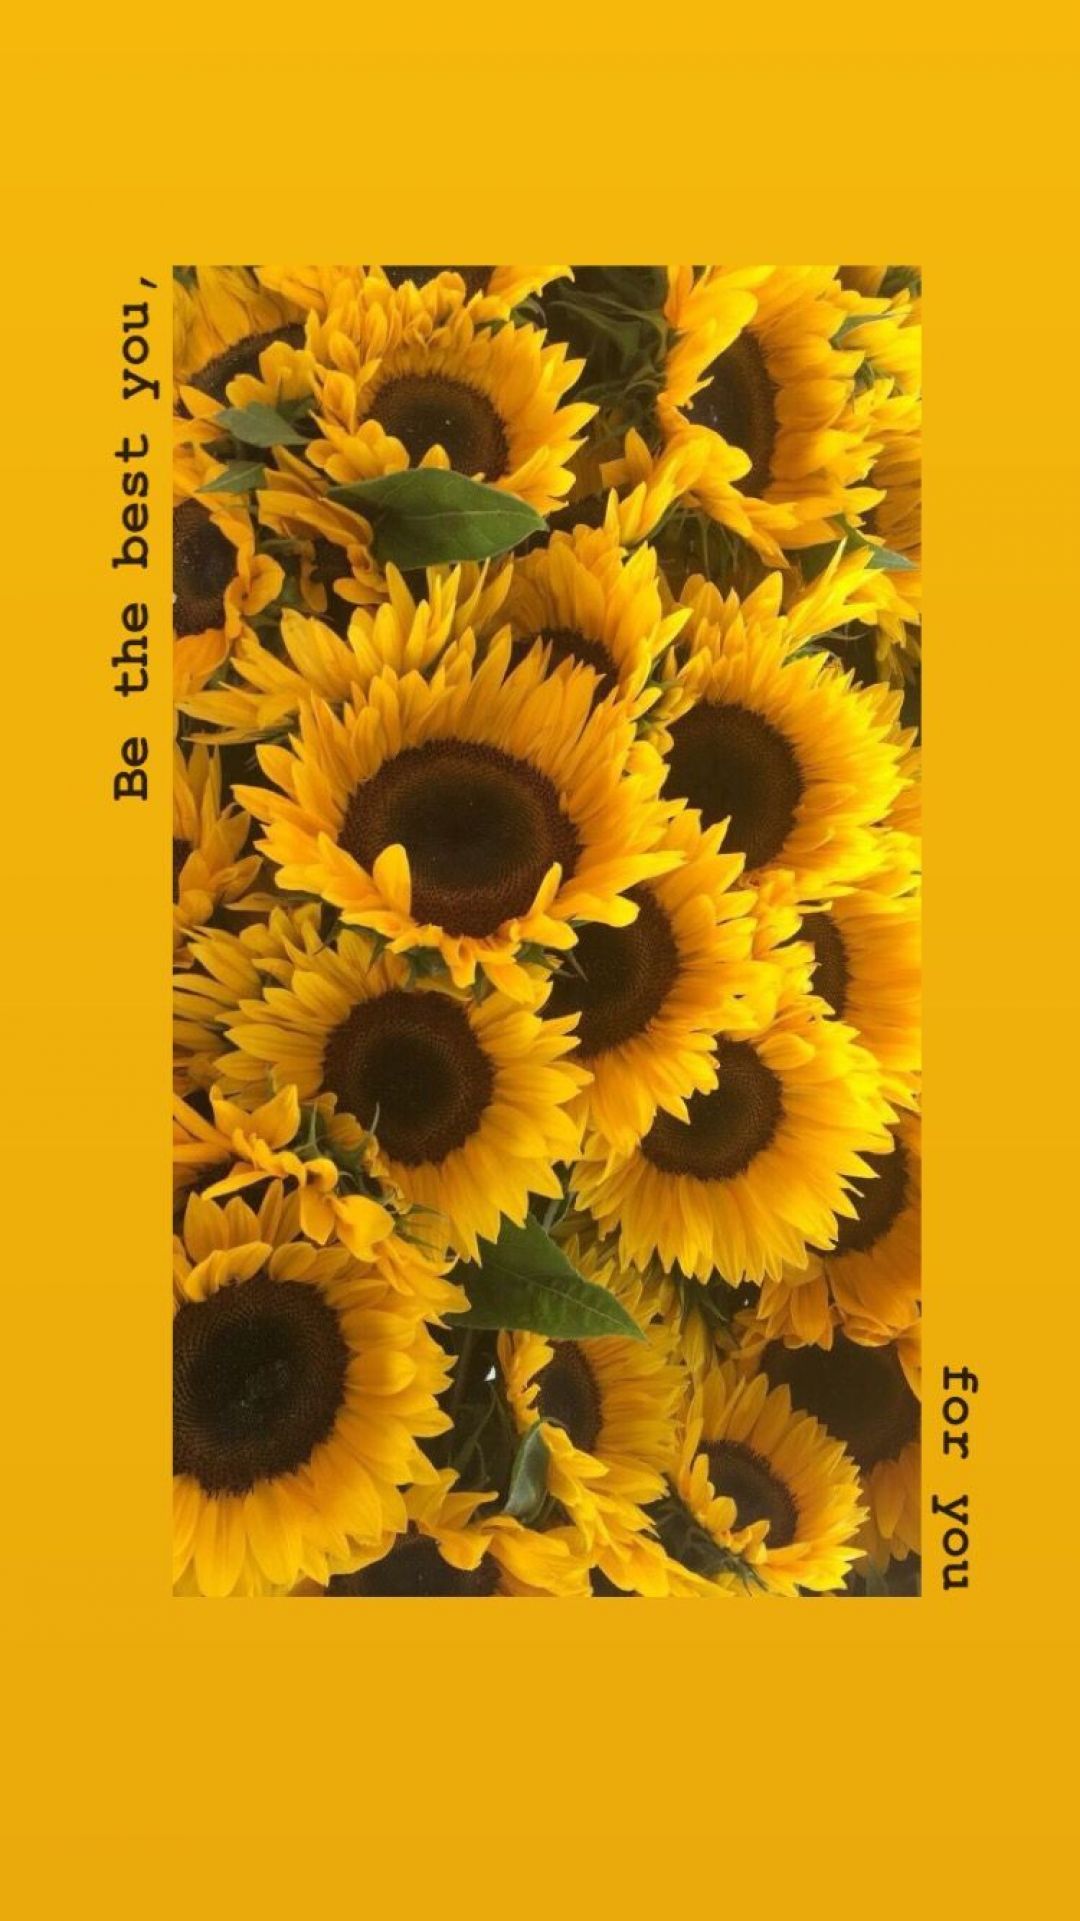 Yellow Aesthetic Sunflowers Hd Wallpapers (1080p, 4k) - Aesthetic Wallpaper Yellow Sunflower , HD Wallpaper & Backgrounds